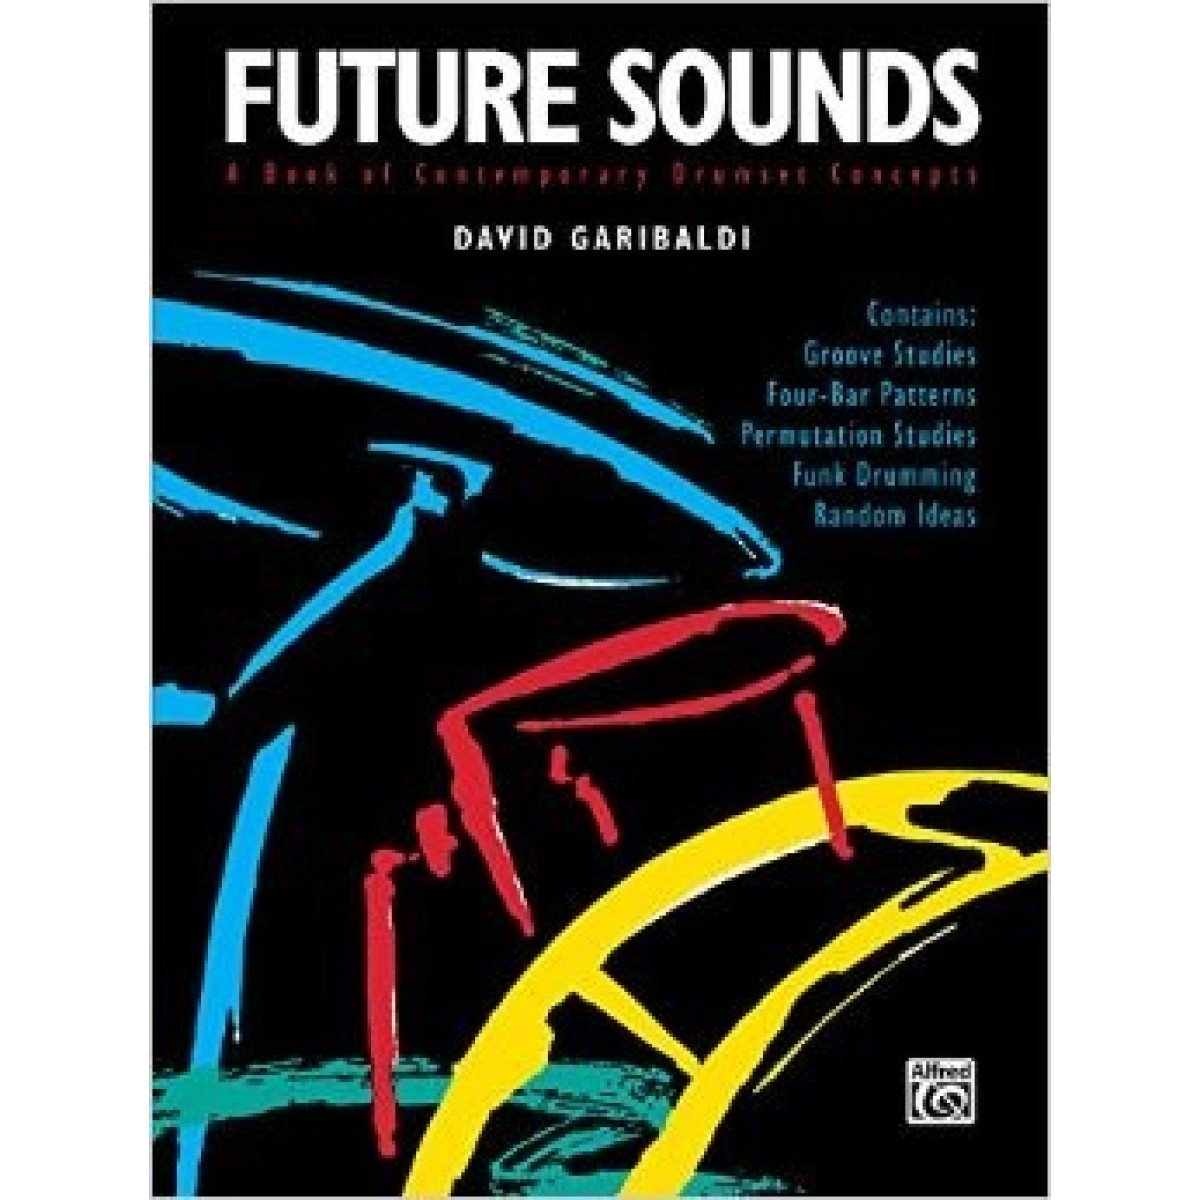 Future Sounds, A Book Of Contemporary Drumset Concepts (Book Only)